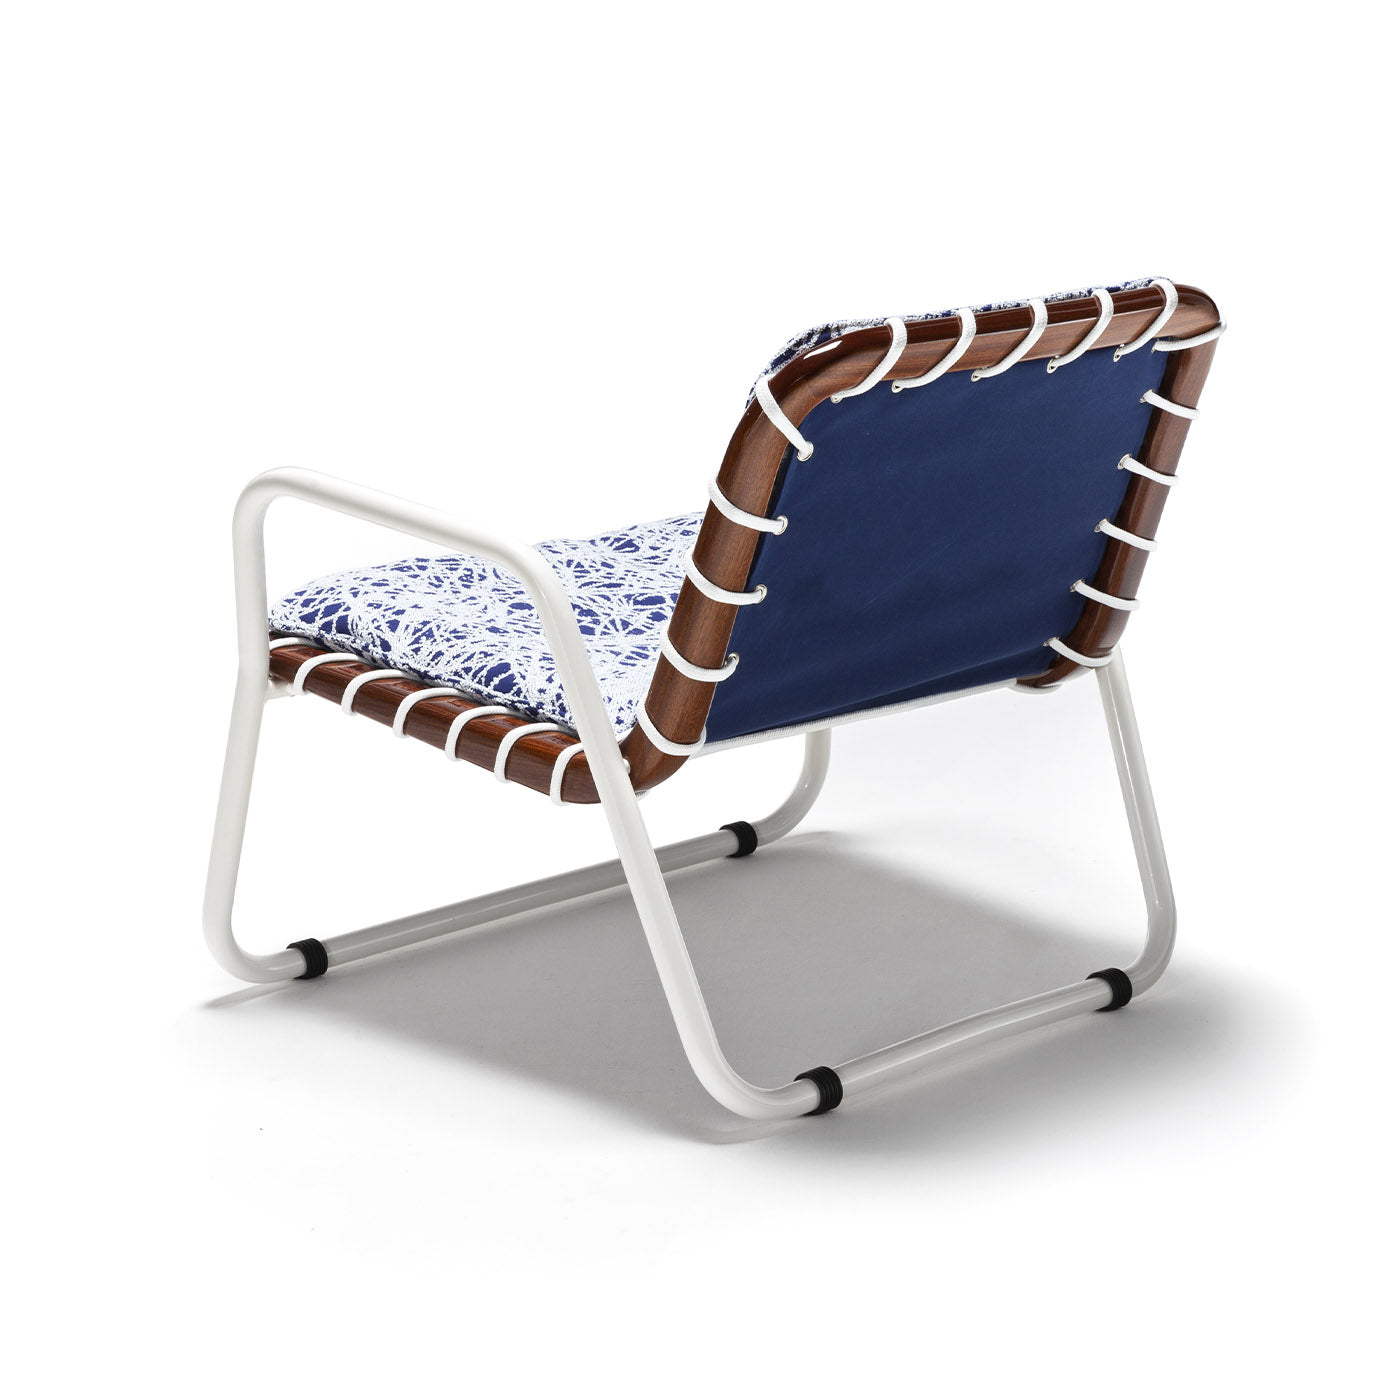 Sunset Blue & White Armchair by Paola Navone - Alternative view 1